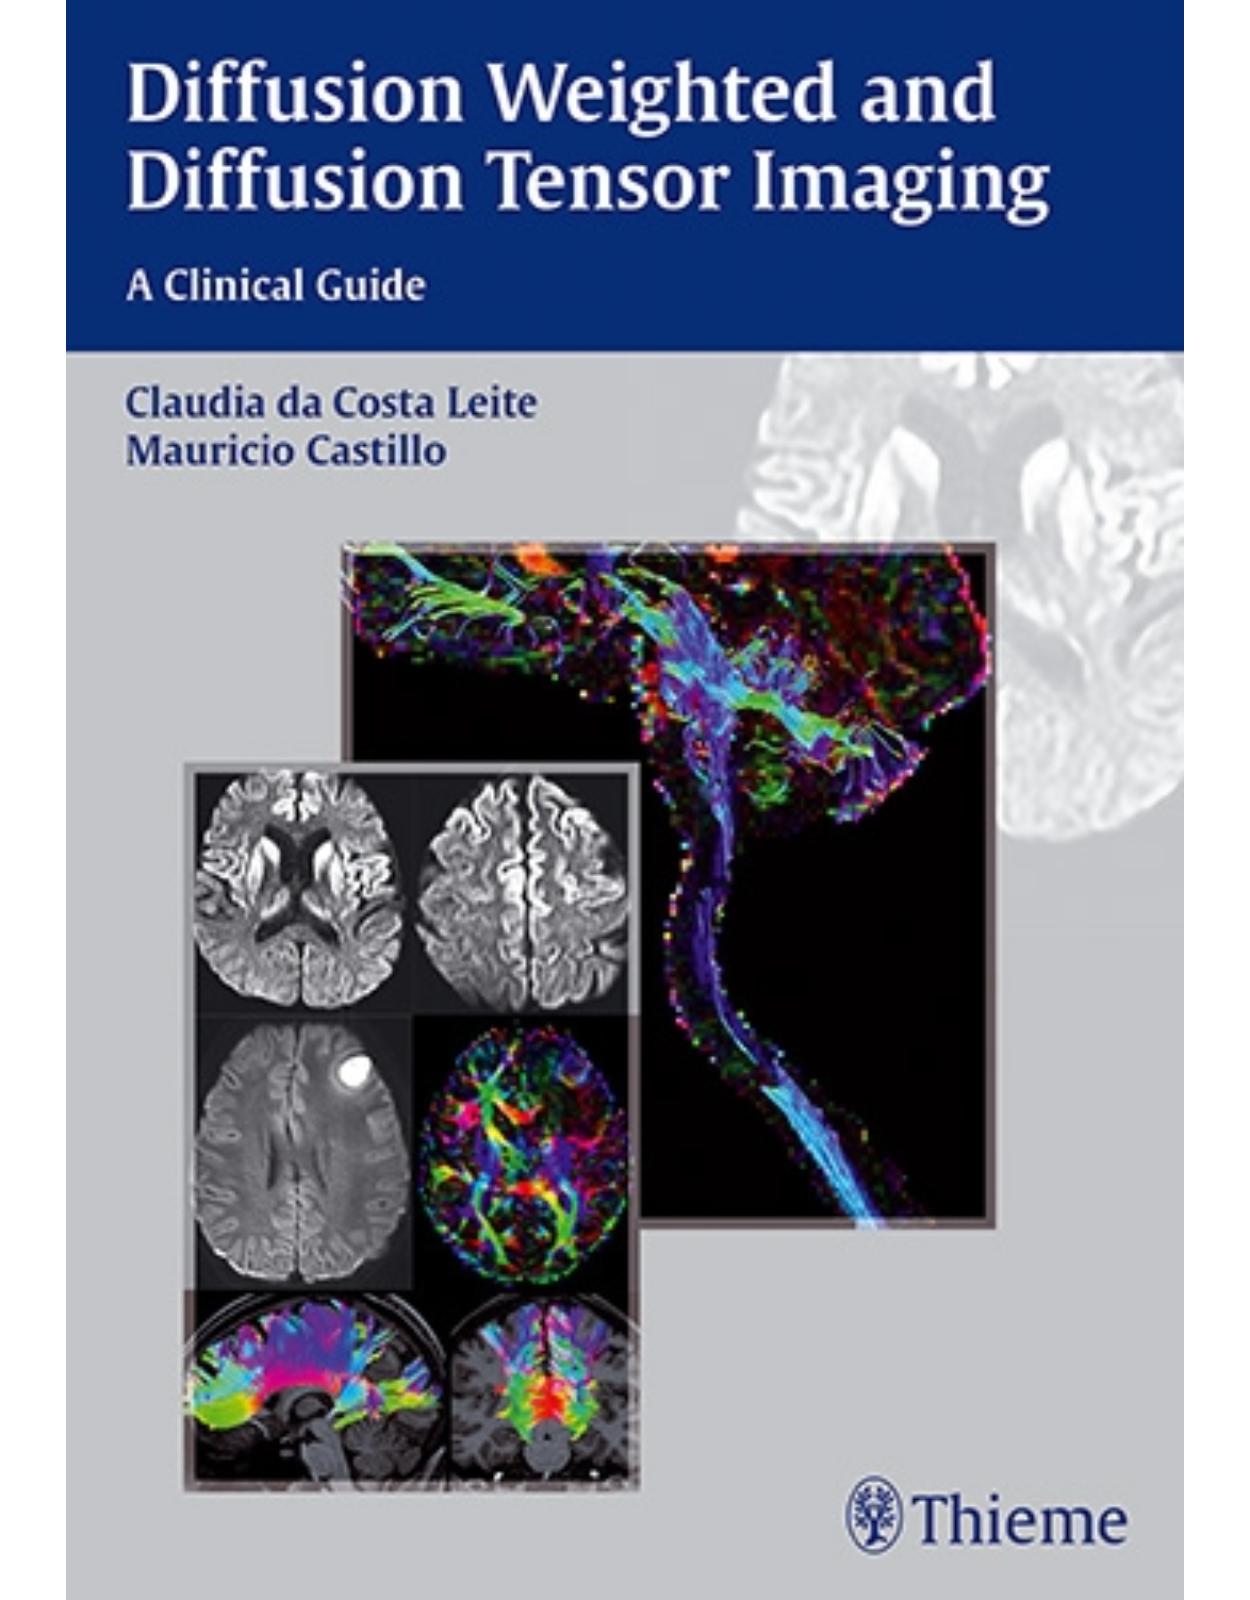  Diffusion Weighted and Diffusion Tensor Imaging: A Clinical Guide